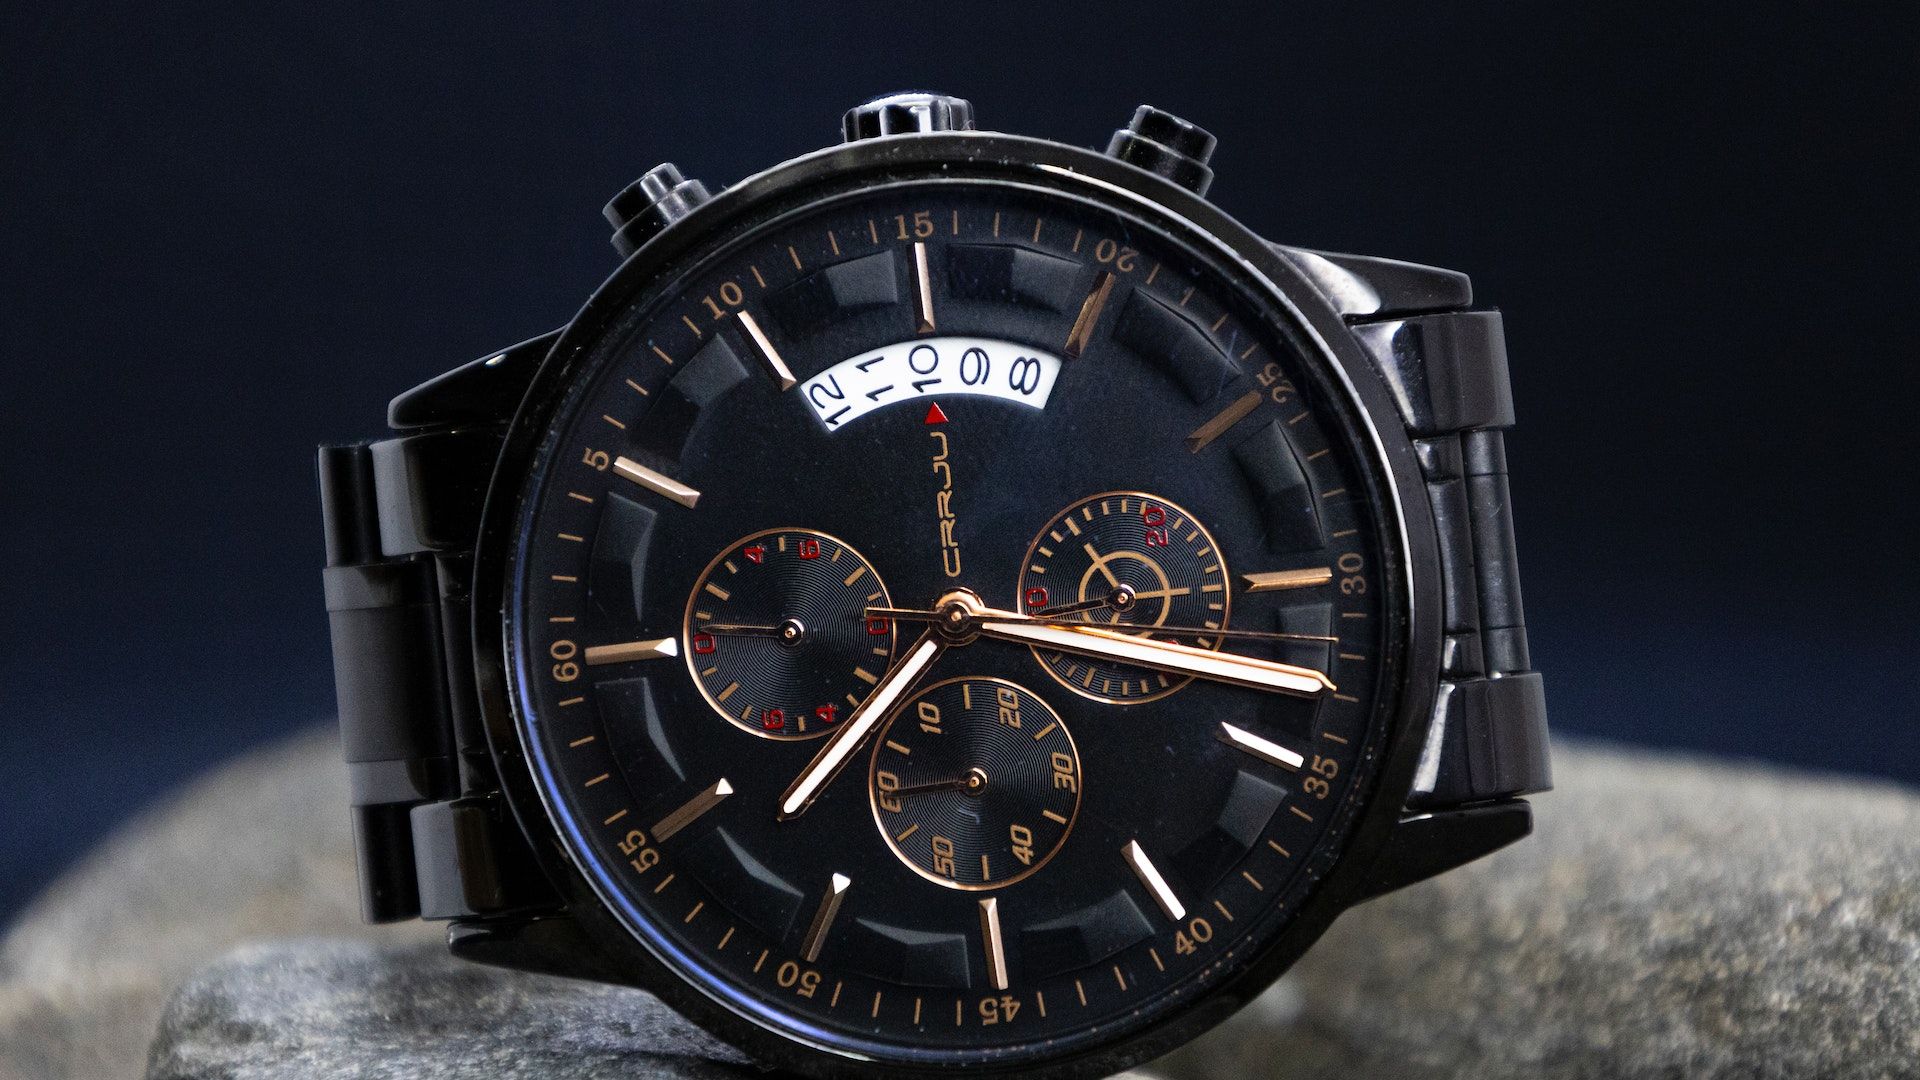 Amp Up Your Style Quotient With The Trendiest Black Watches For Men